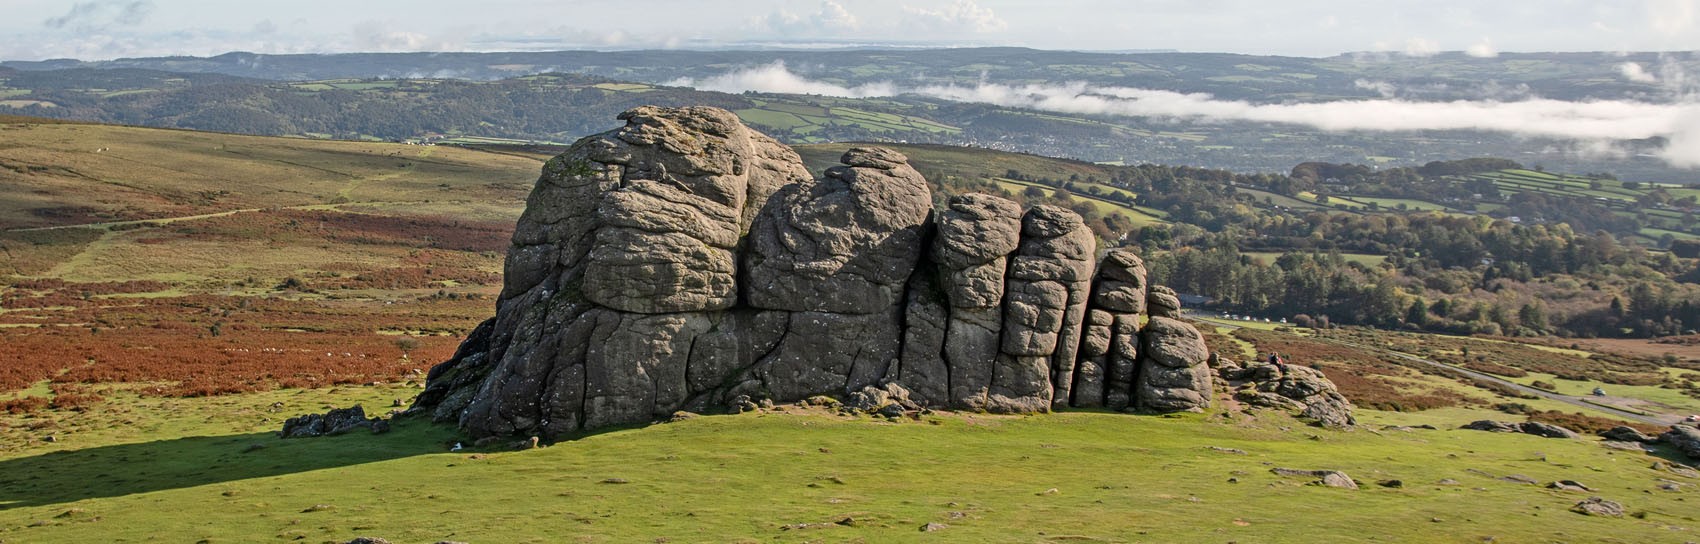 Haytor with the South Devon coast in the background. Photograph by ALEX GRAEME